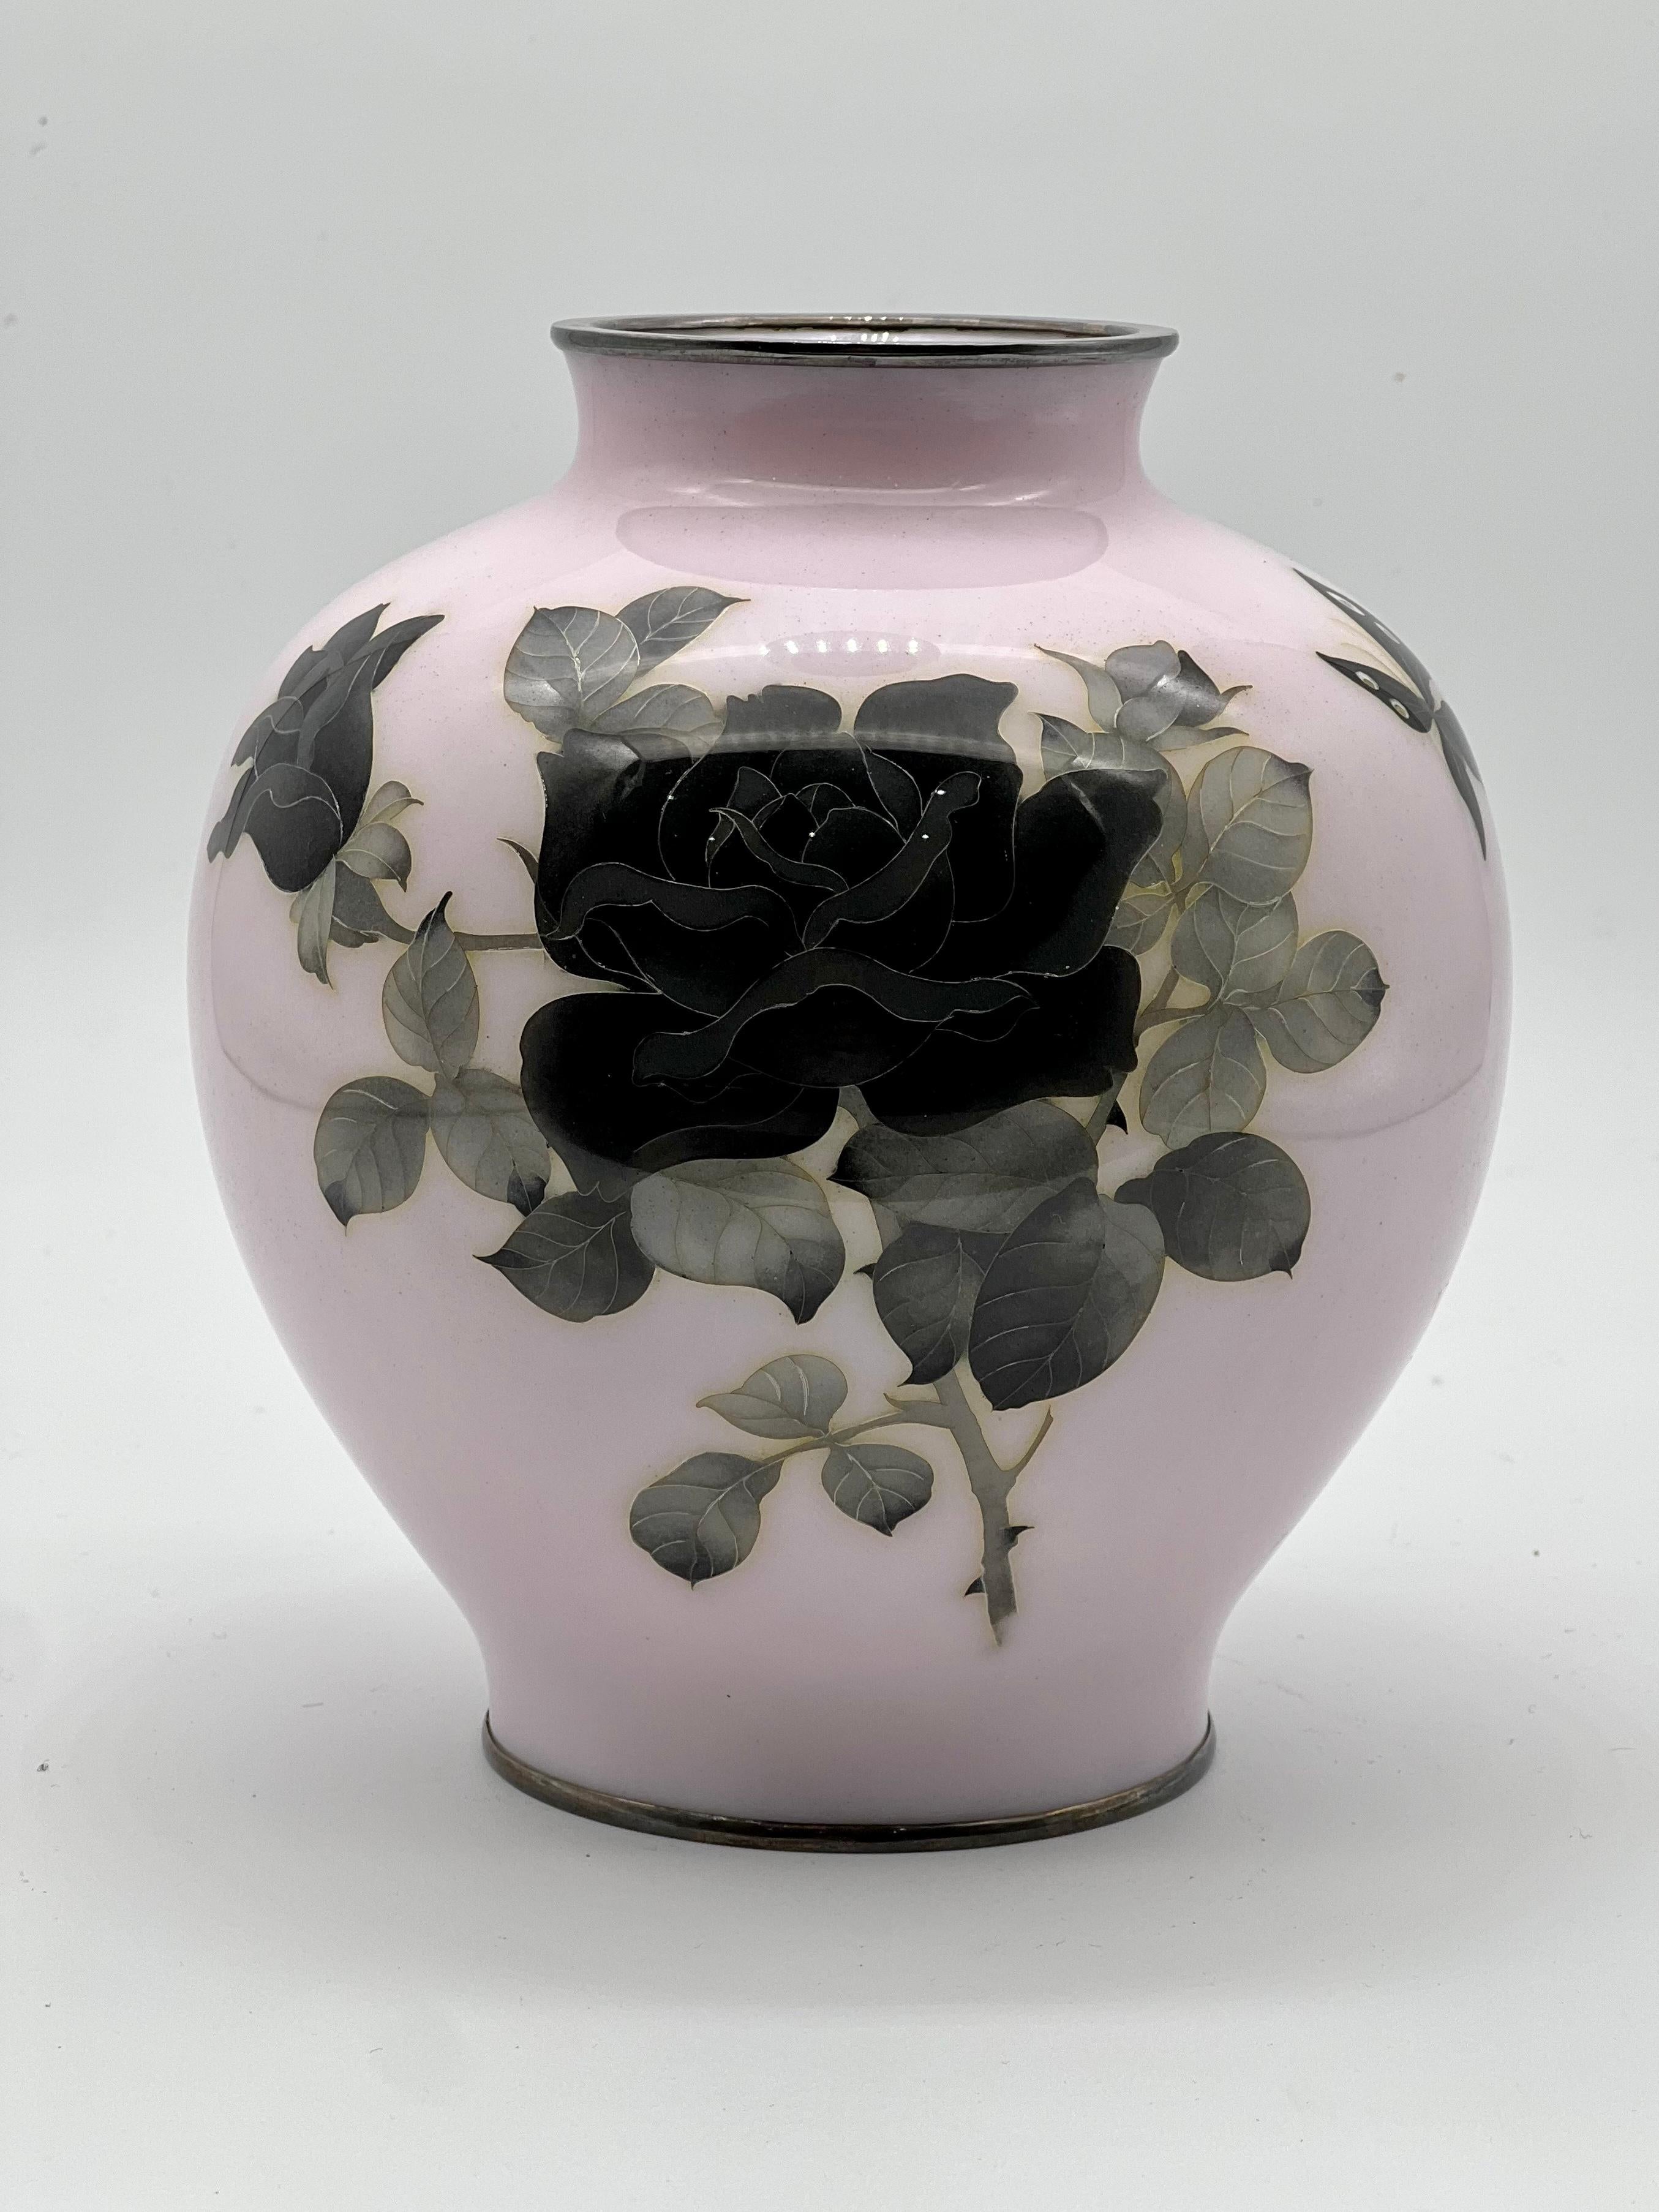 A MAGNIFICENT ANTIQUE JAPANESE CLOISONNE ENAMEL VASE BY ANDO JUBEI. 

Late 19th Early 20th Century -Meiji period 

A elegant  and attractive cloisonné enamel vase by Ando Jubei, decorated with shaded black enamels and silver wire with a large